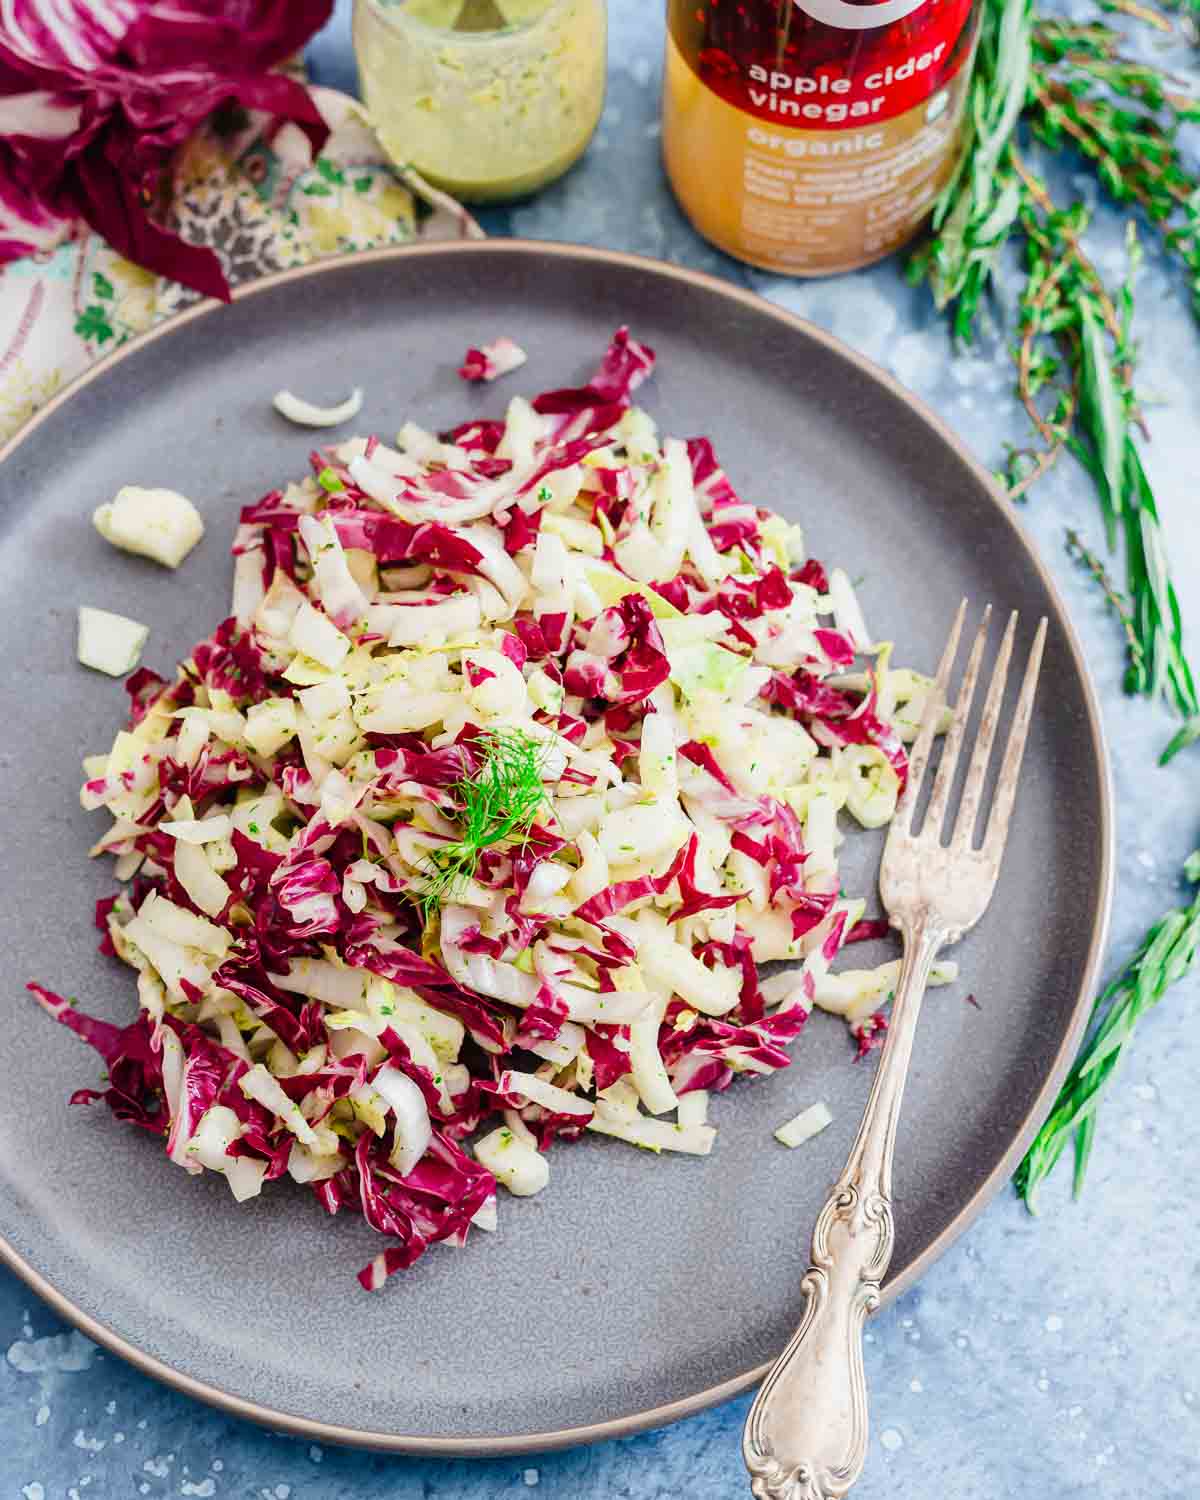 Endive, radicchio and fennel salad on a blue plate.